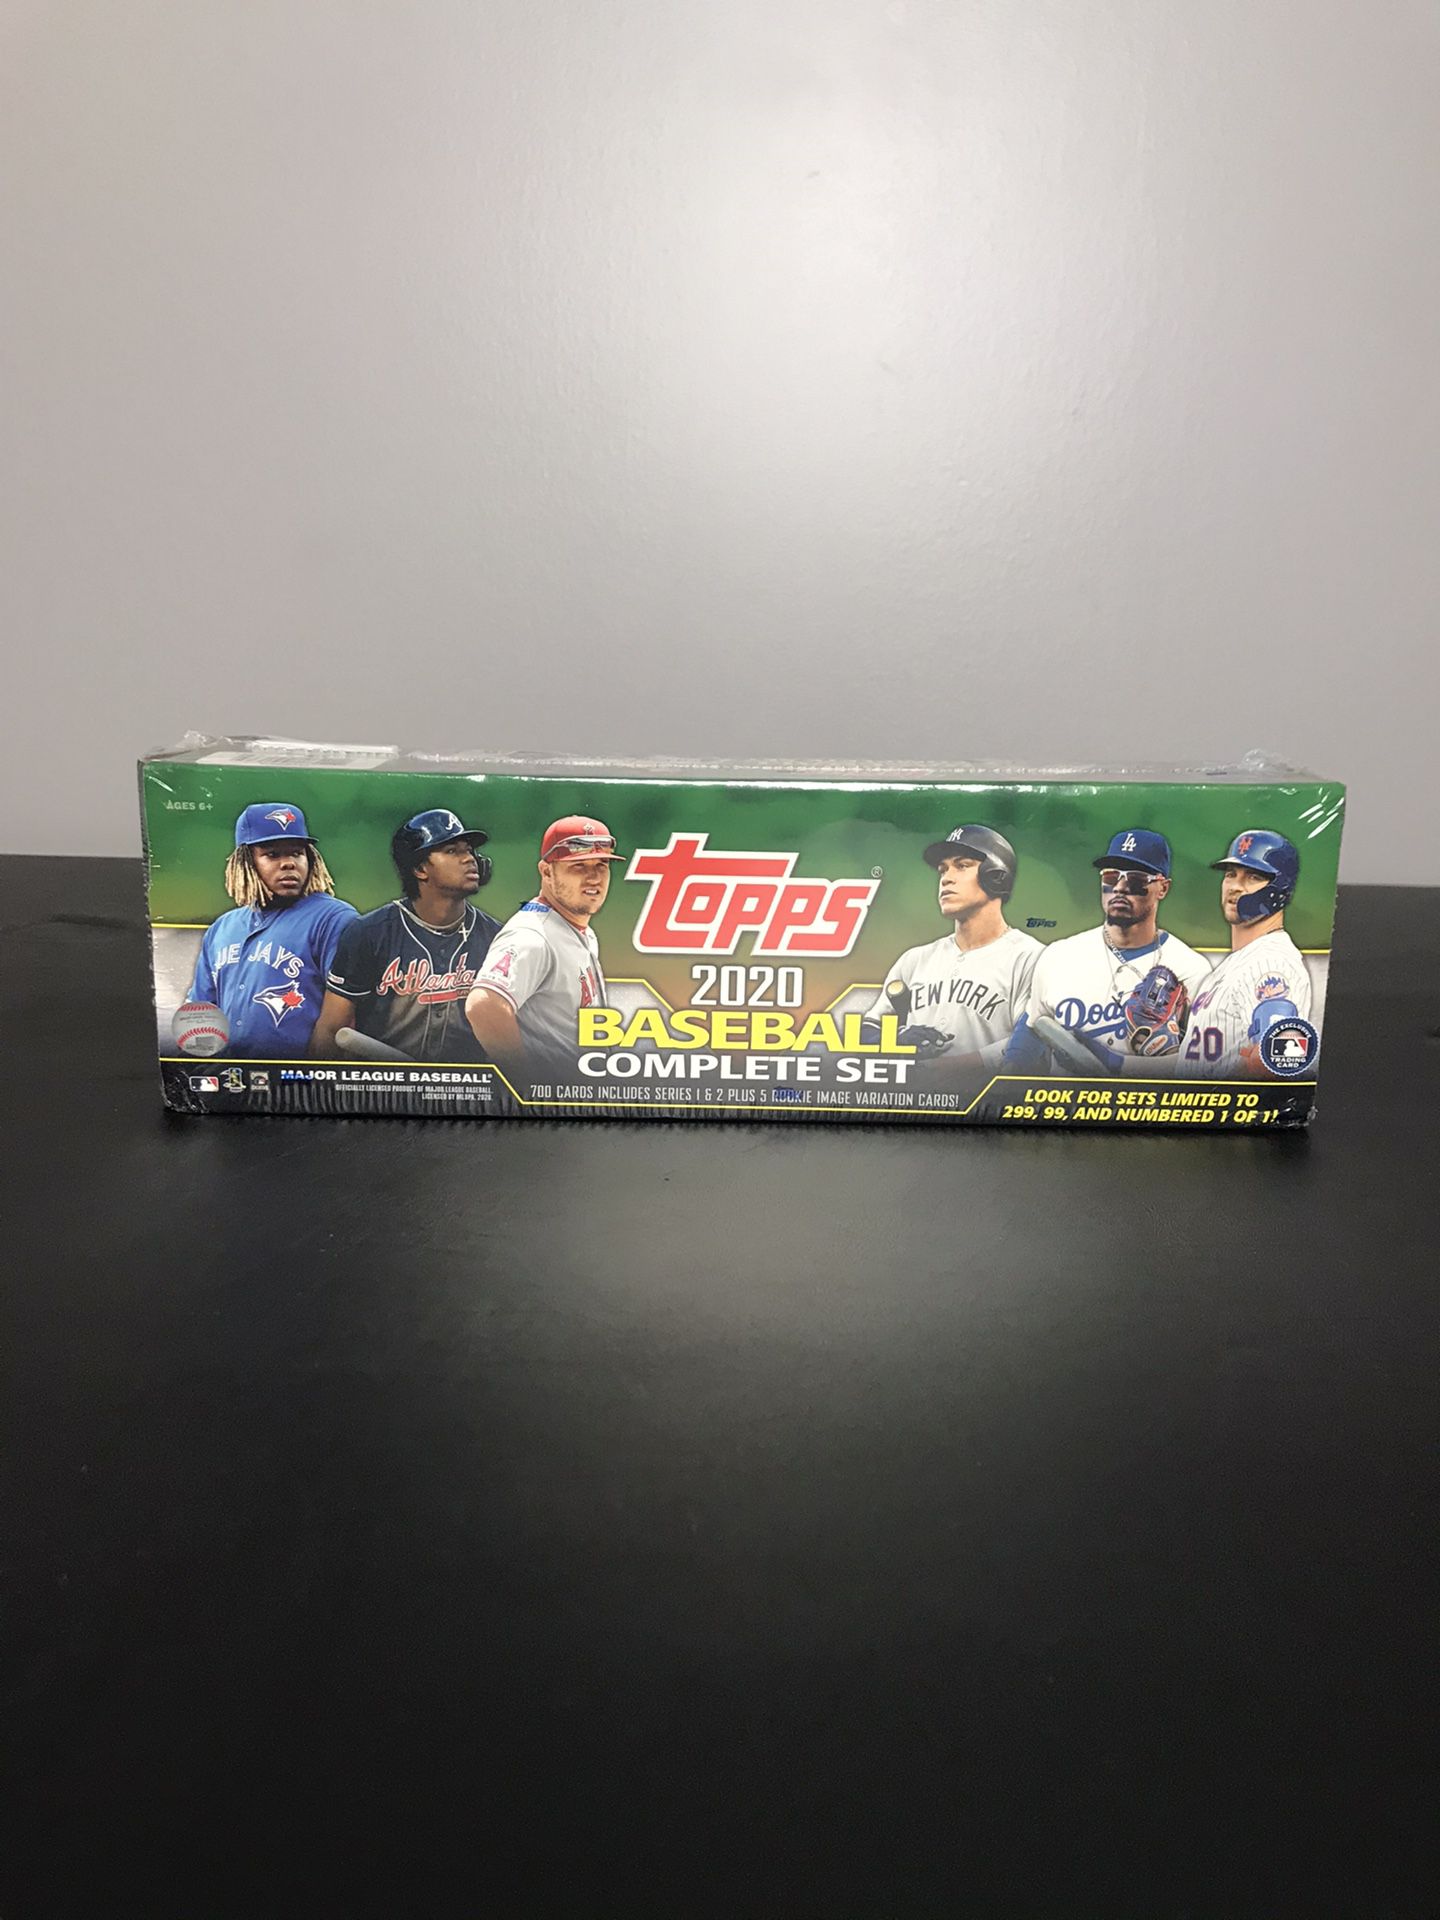 ⚾2020 TOPPS BASEBALL COMPLETE FACTORY SET- Series 1 and 2= 700 cards⚾